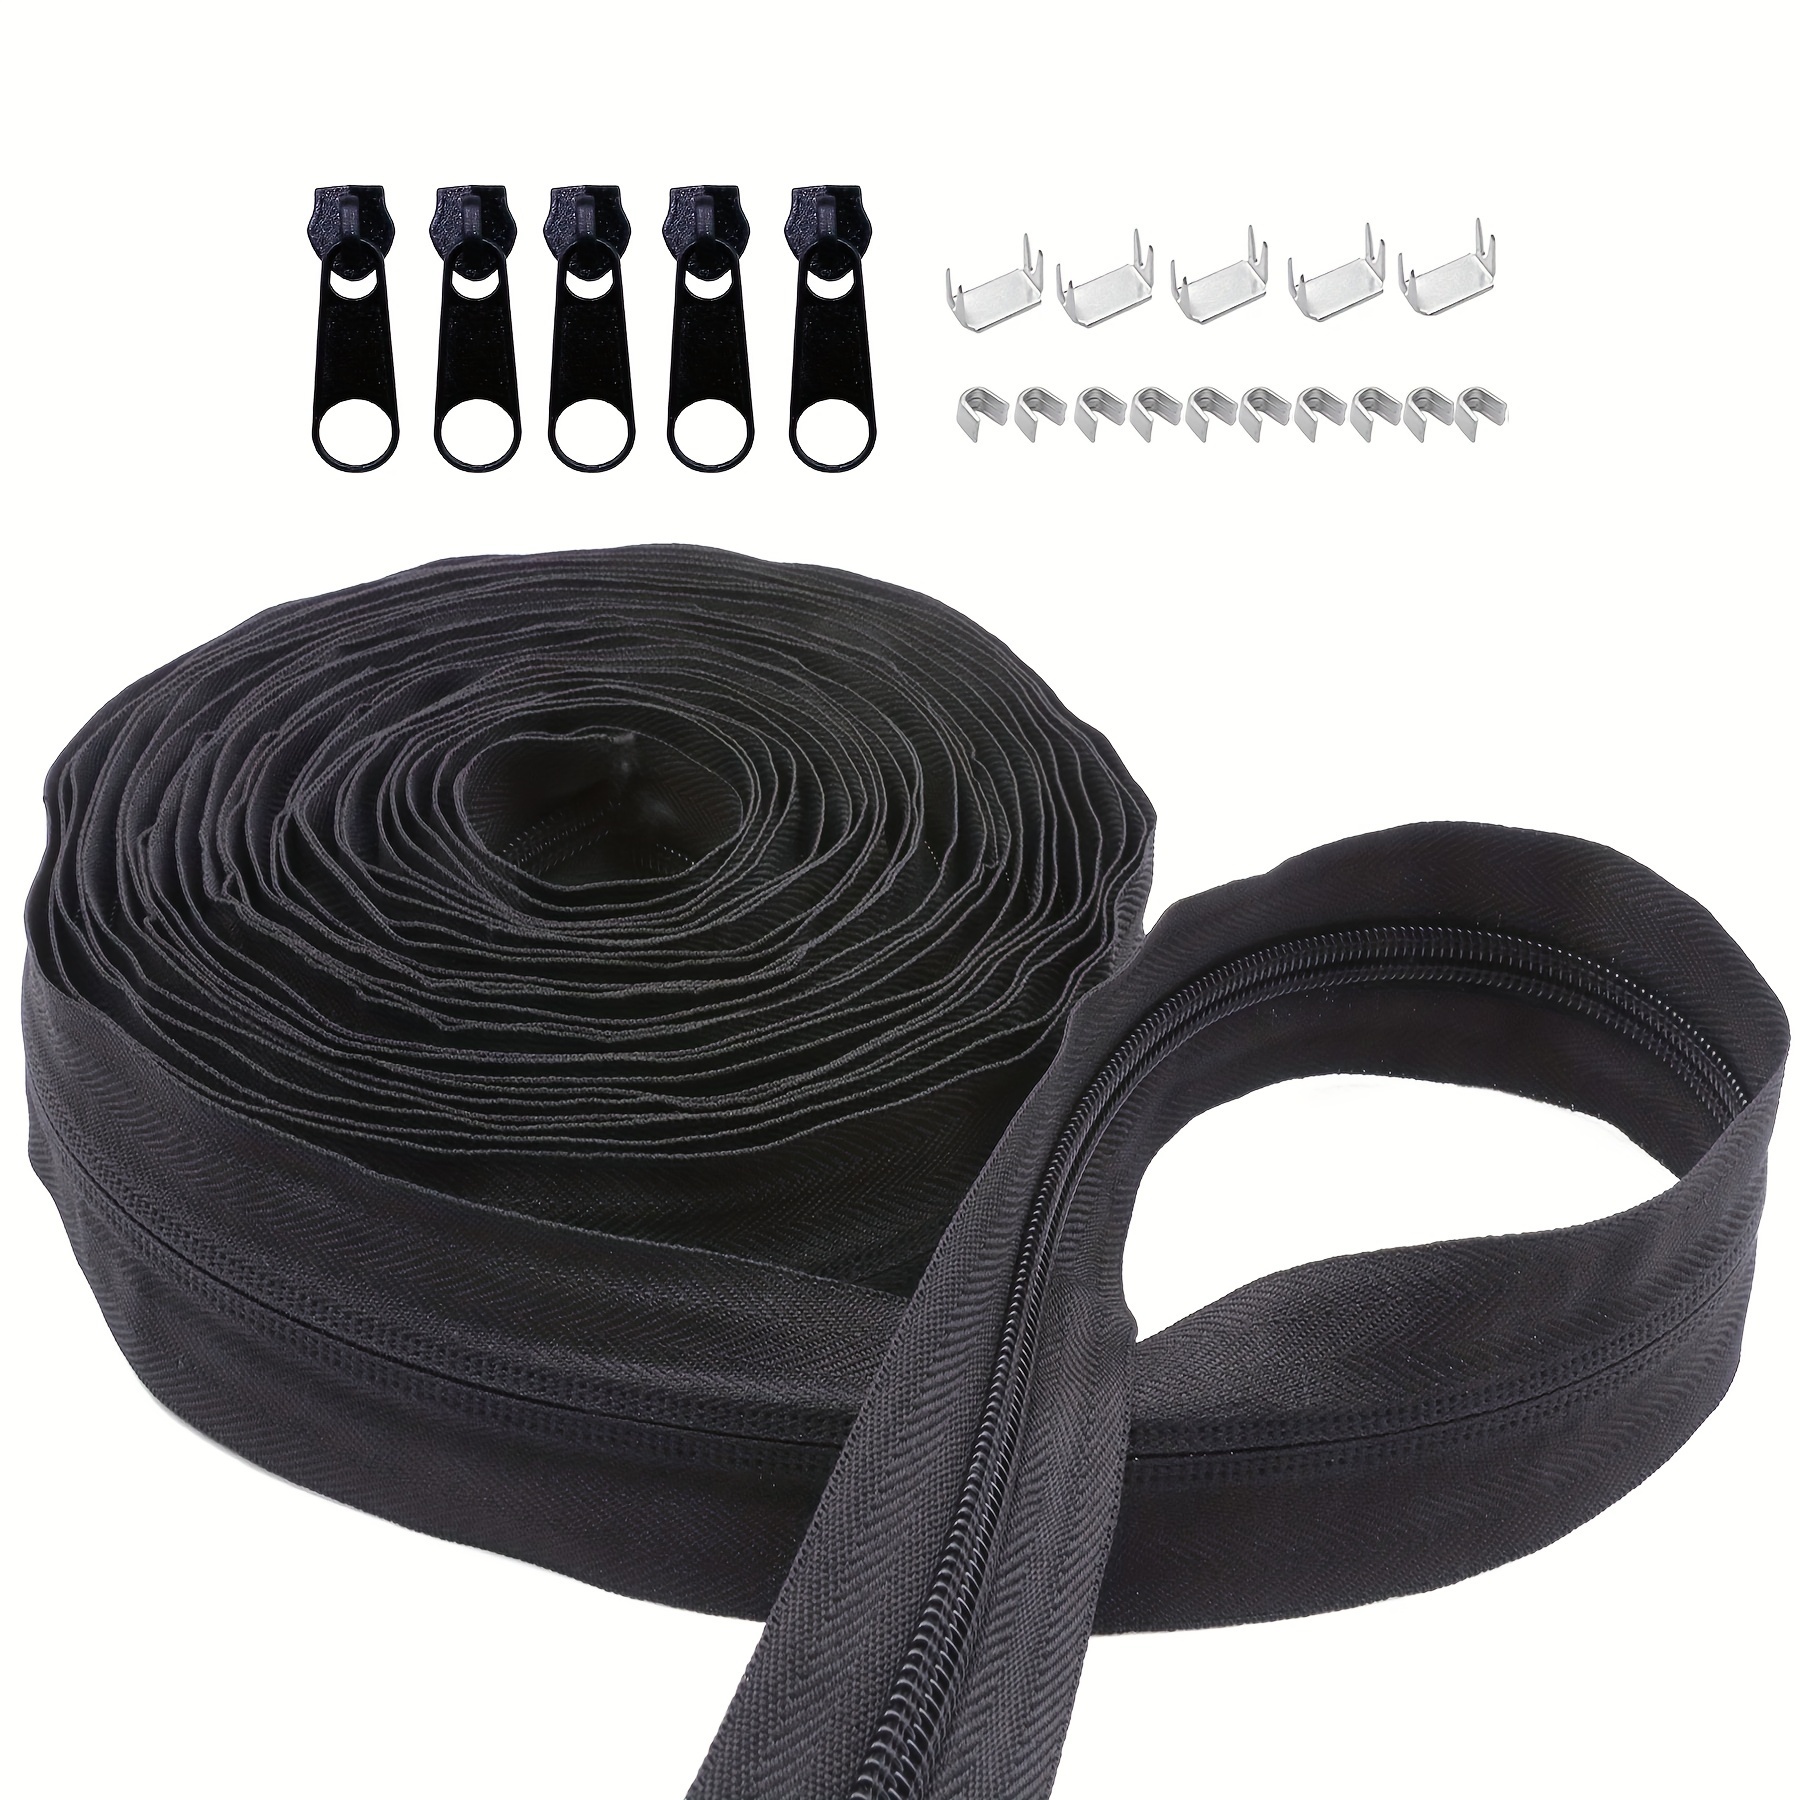 Velcro Cable Tie Roll, 3/4 x 5 yards